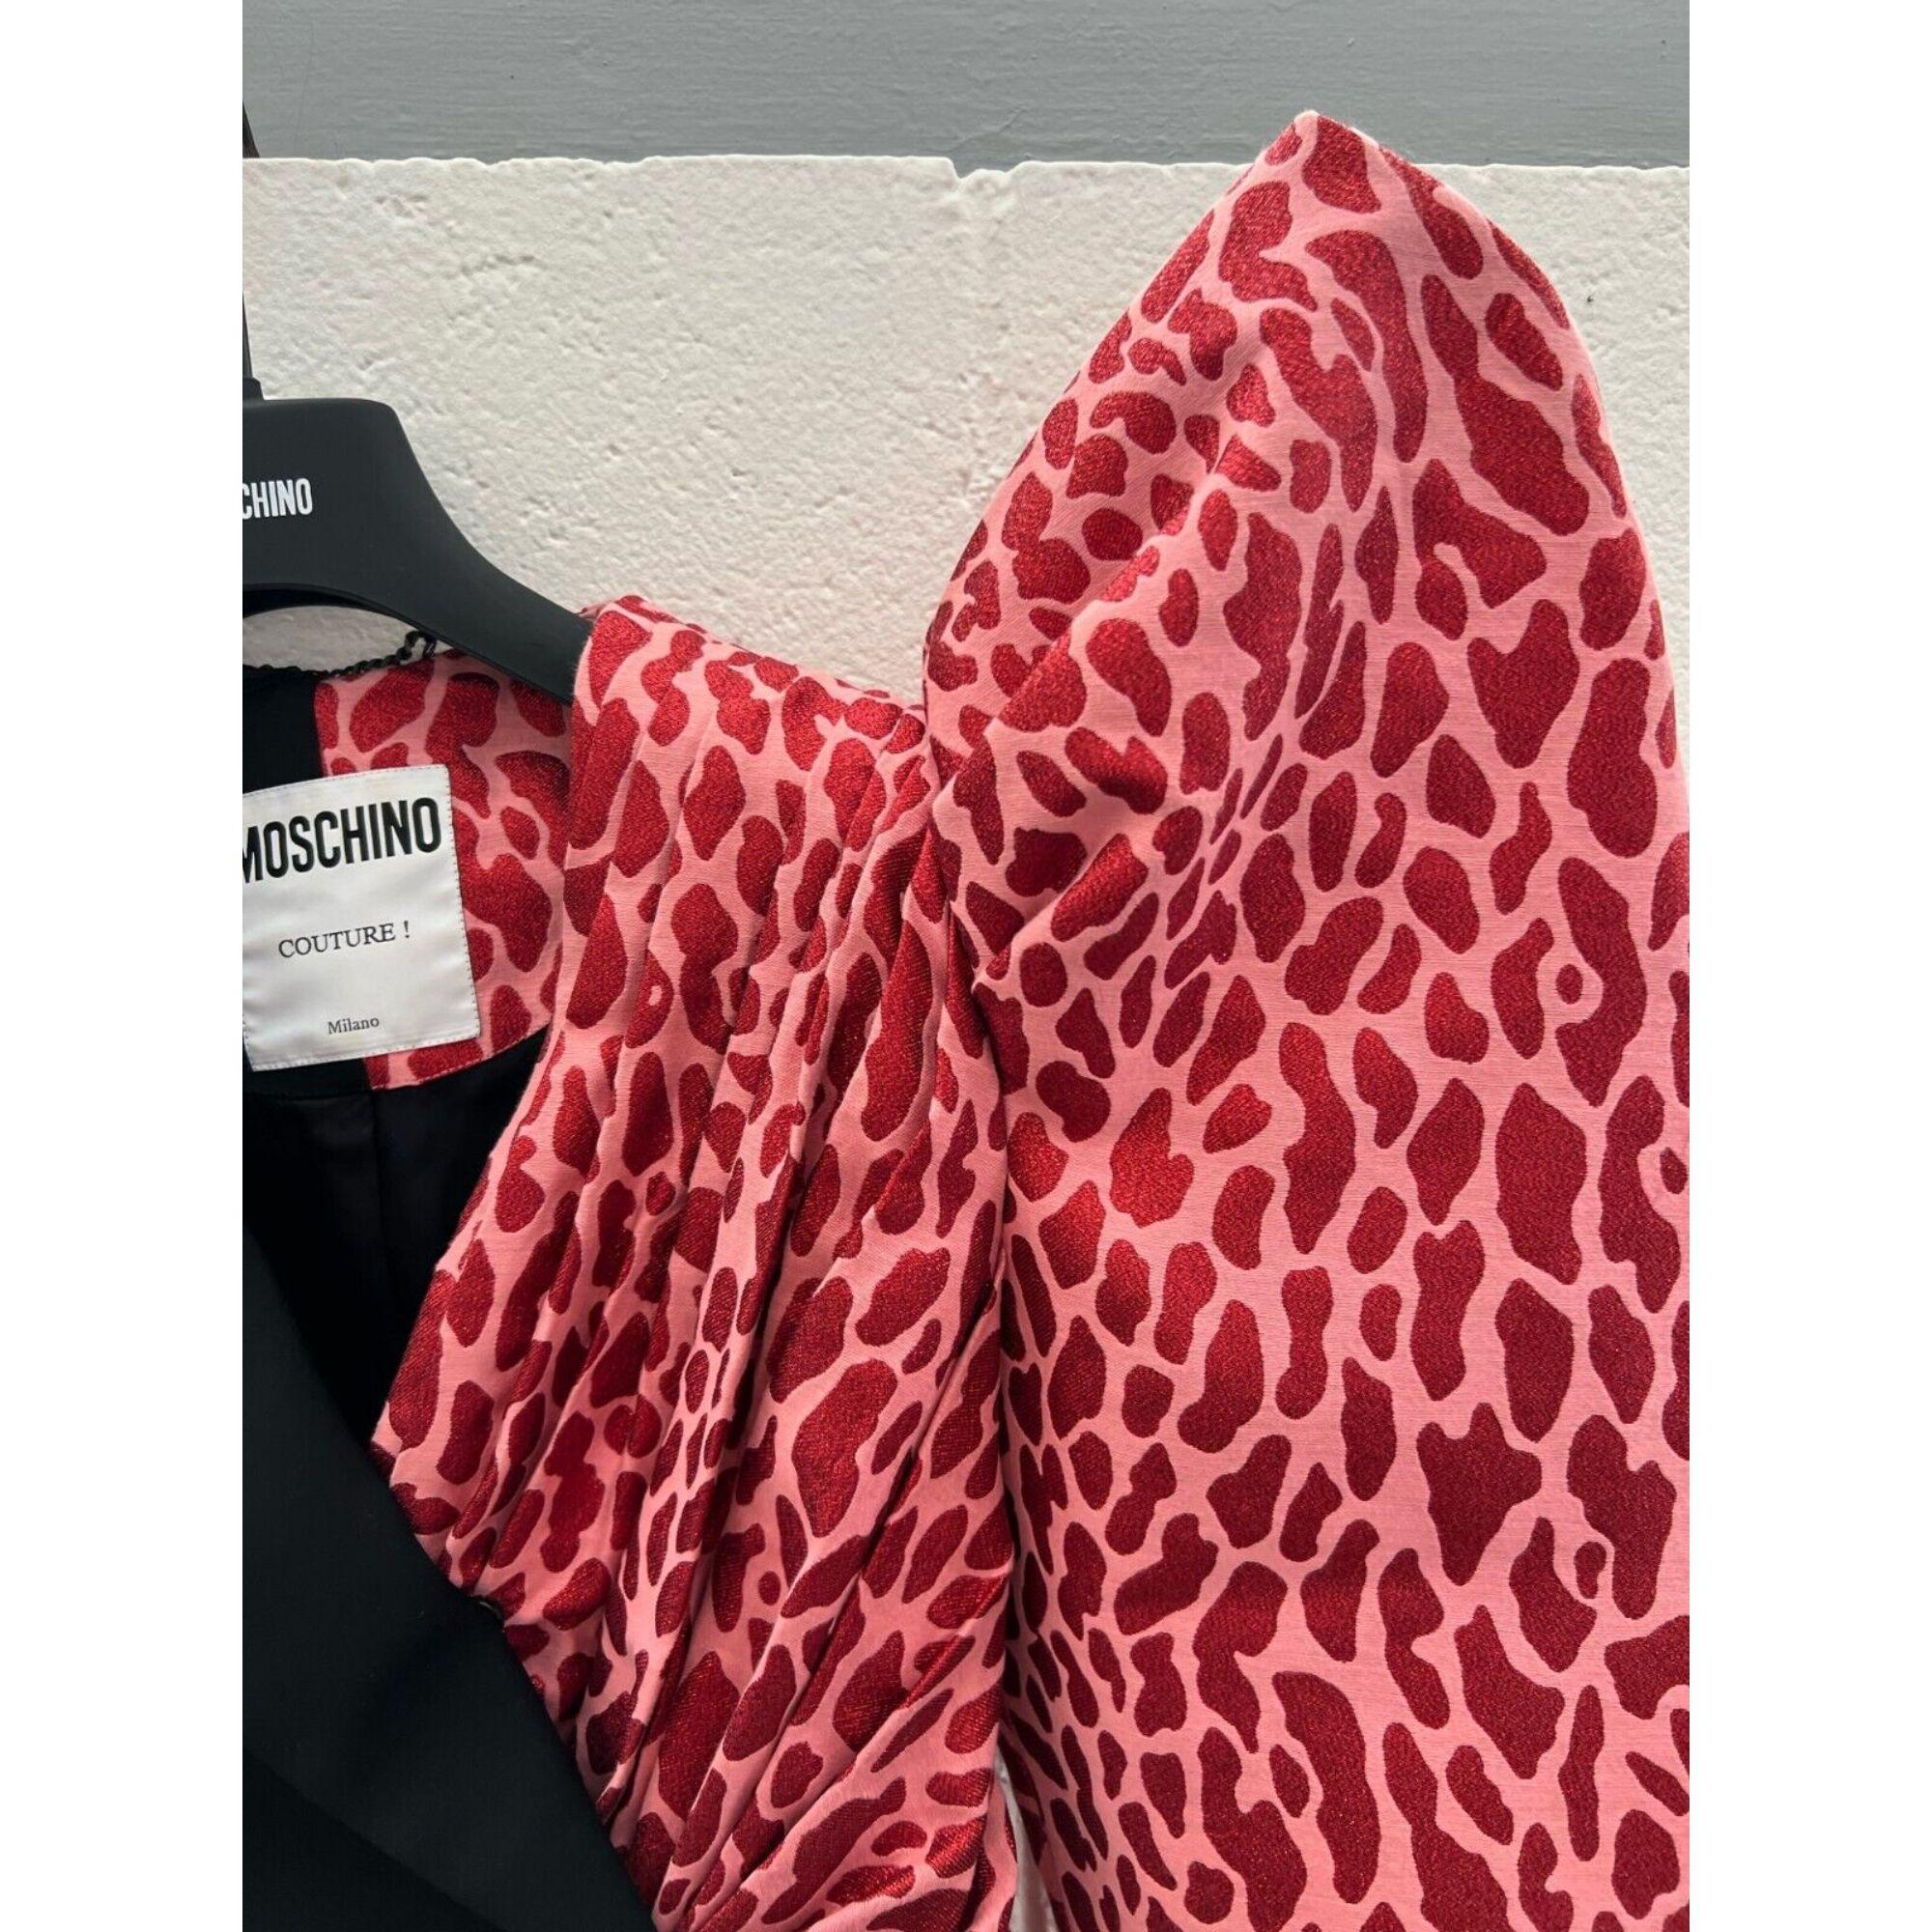 AW21 Moschino Couture Jacket Half Black Half Pink Leopard Spots by Jeremy Scott For Sale 1